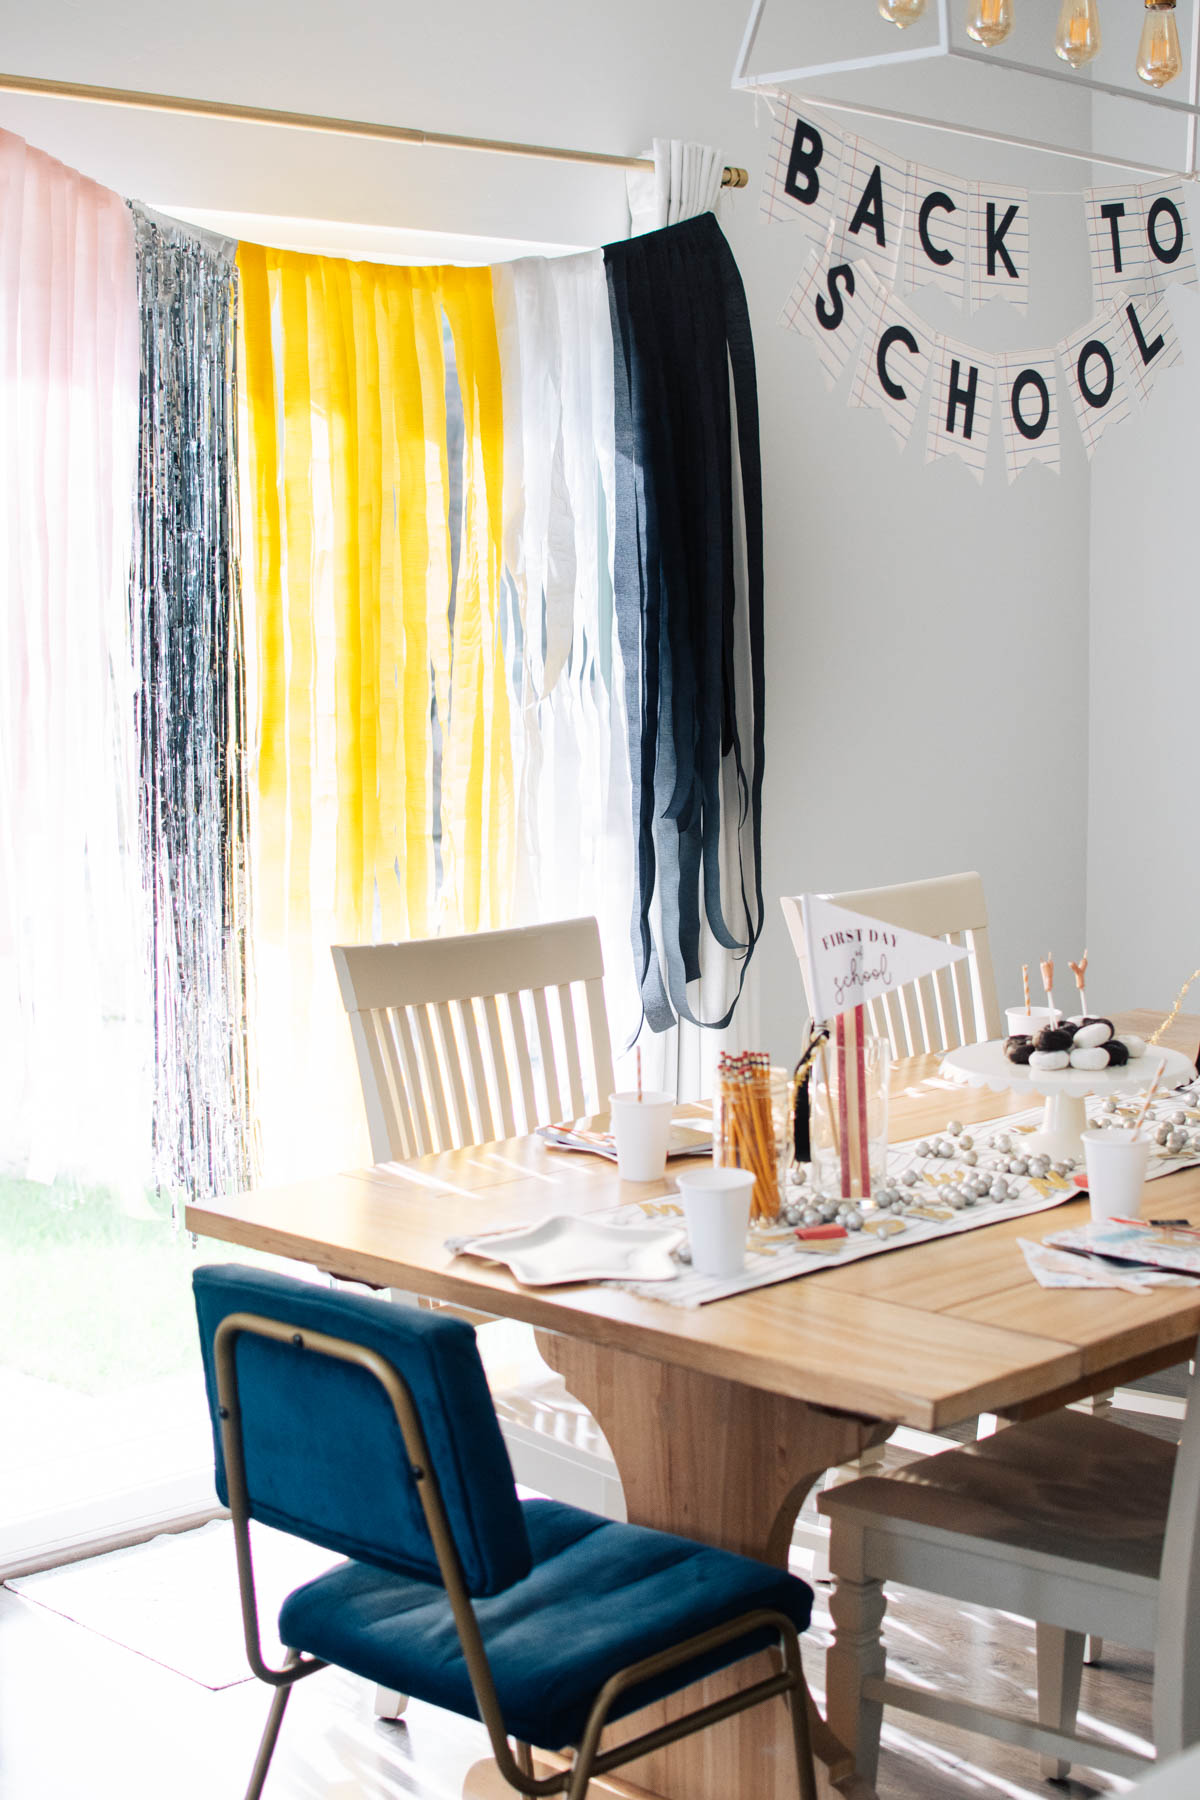 Back to school backdrop with a pencil color pattern hangs behind kitchen table decorated for back to school.